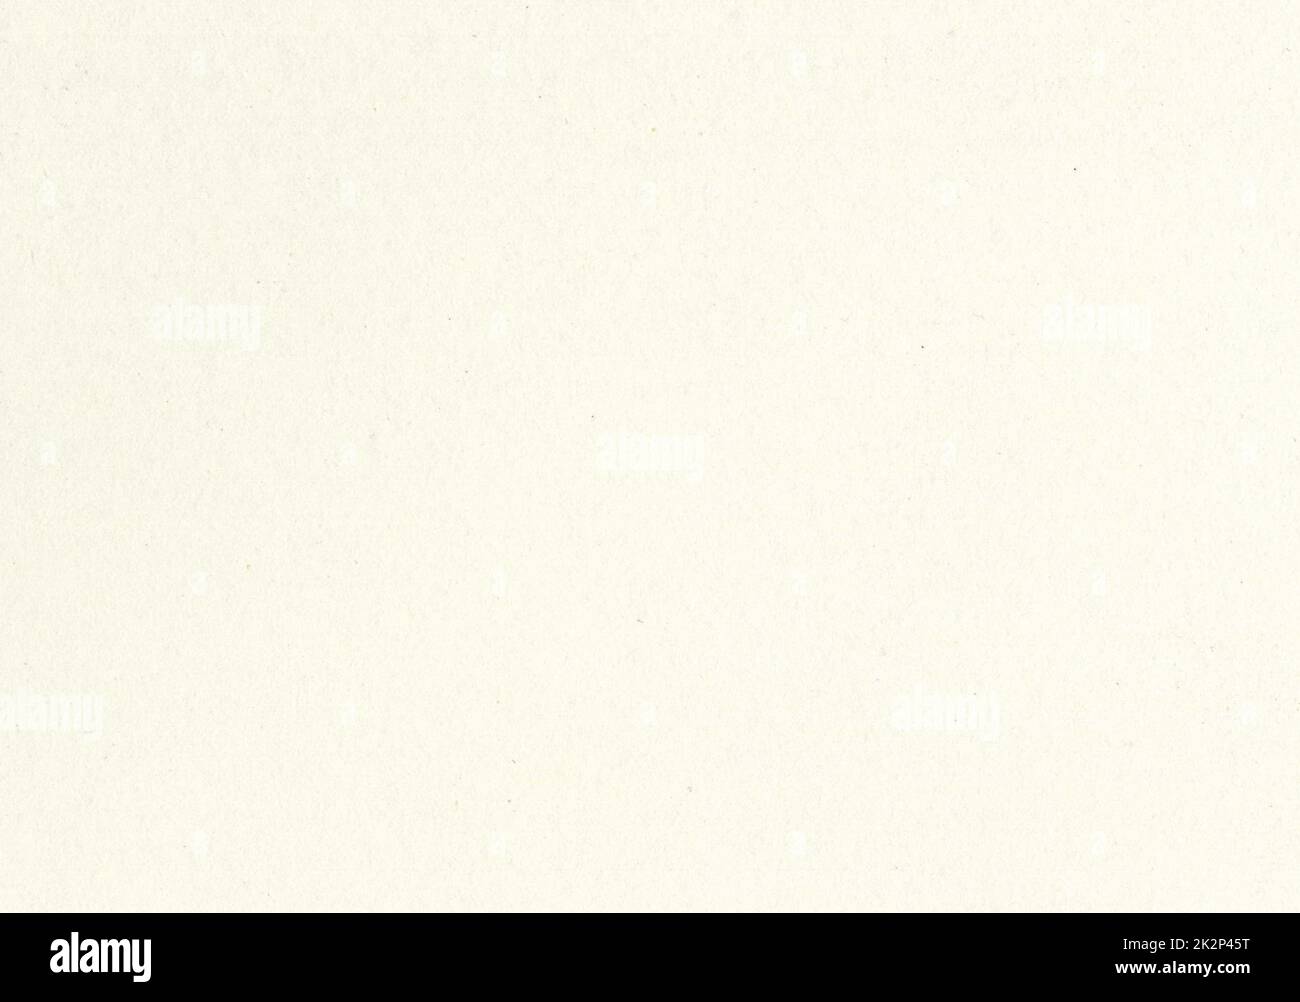 High resolution great zoom close up old light beige paper texture background scan with fine grain fiber and dust particles smooth uncoated aged paper for wallpapers and material mockup Stock Photo